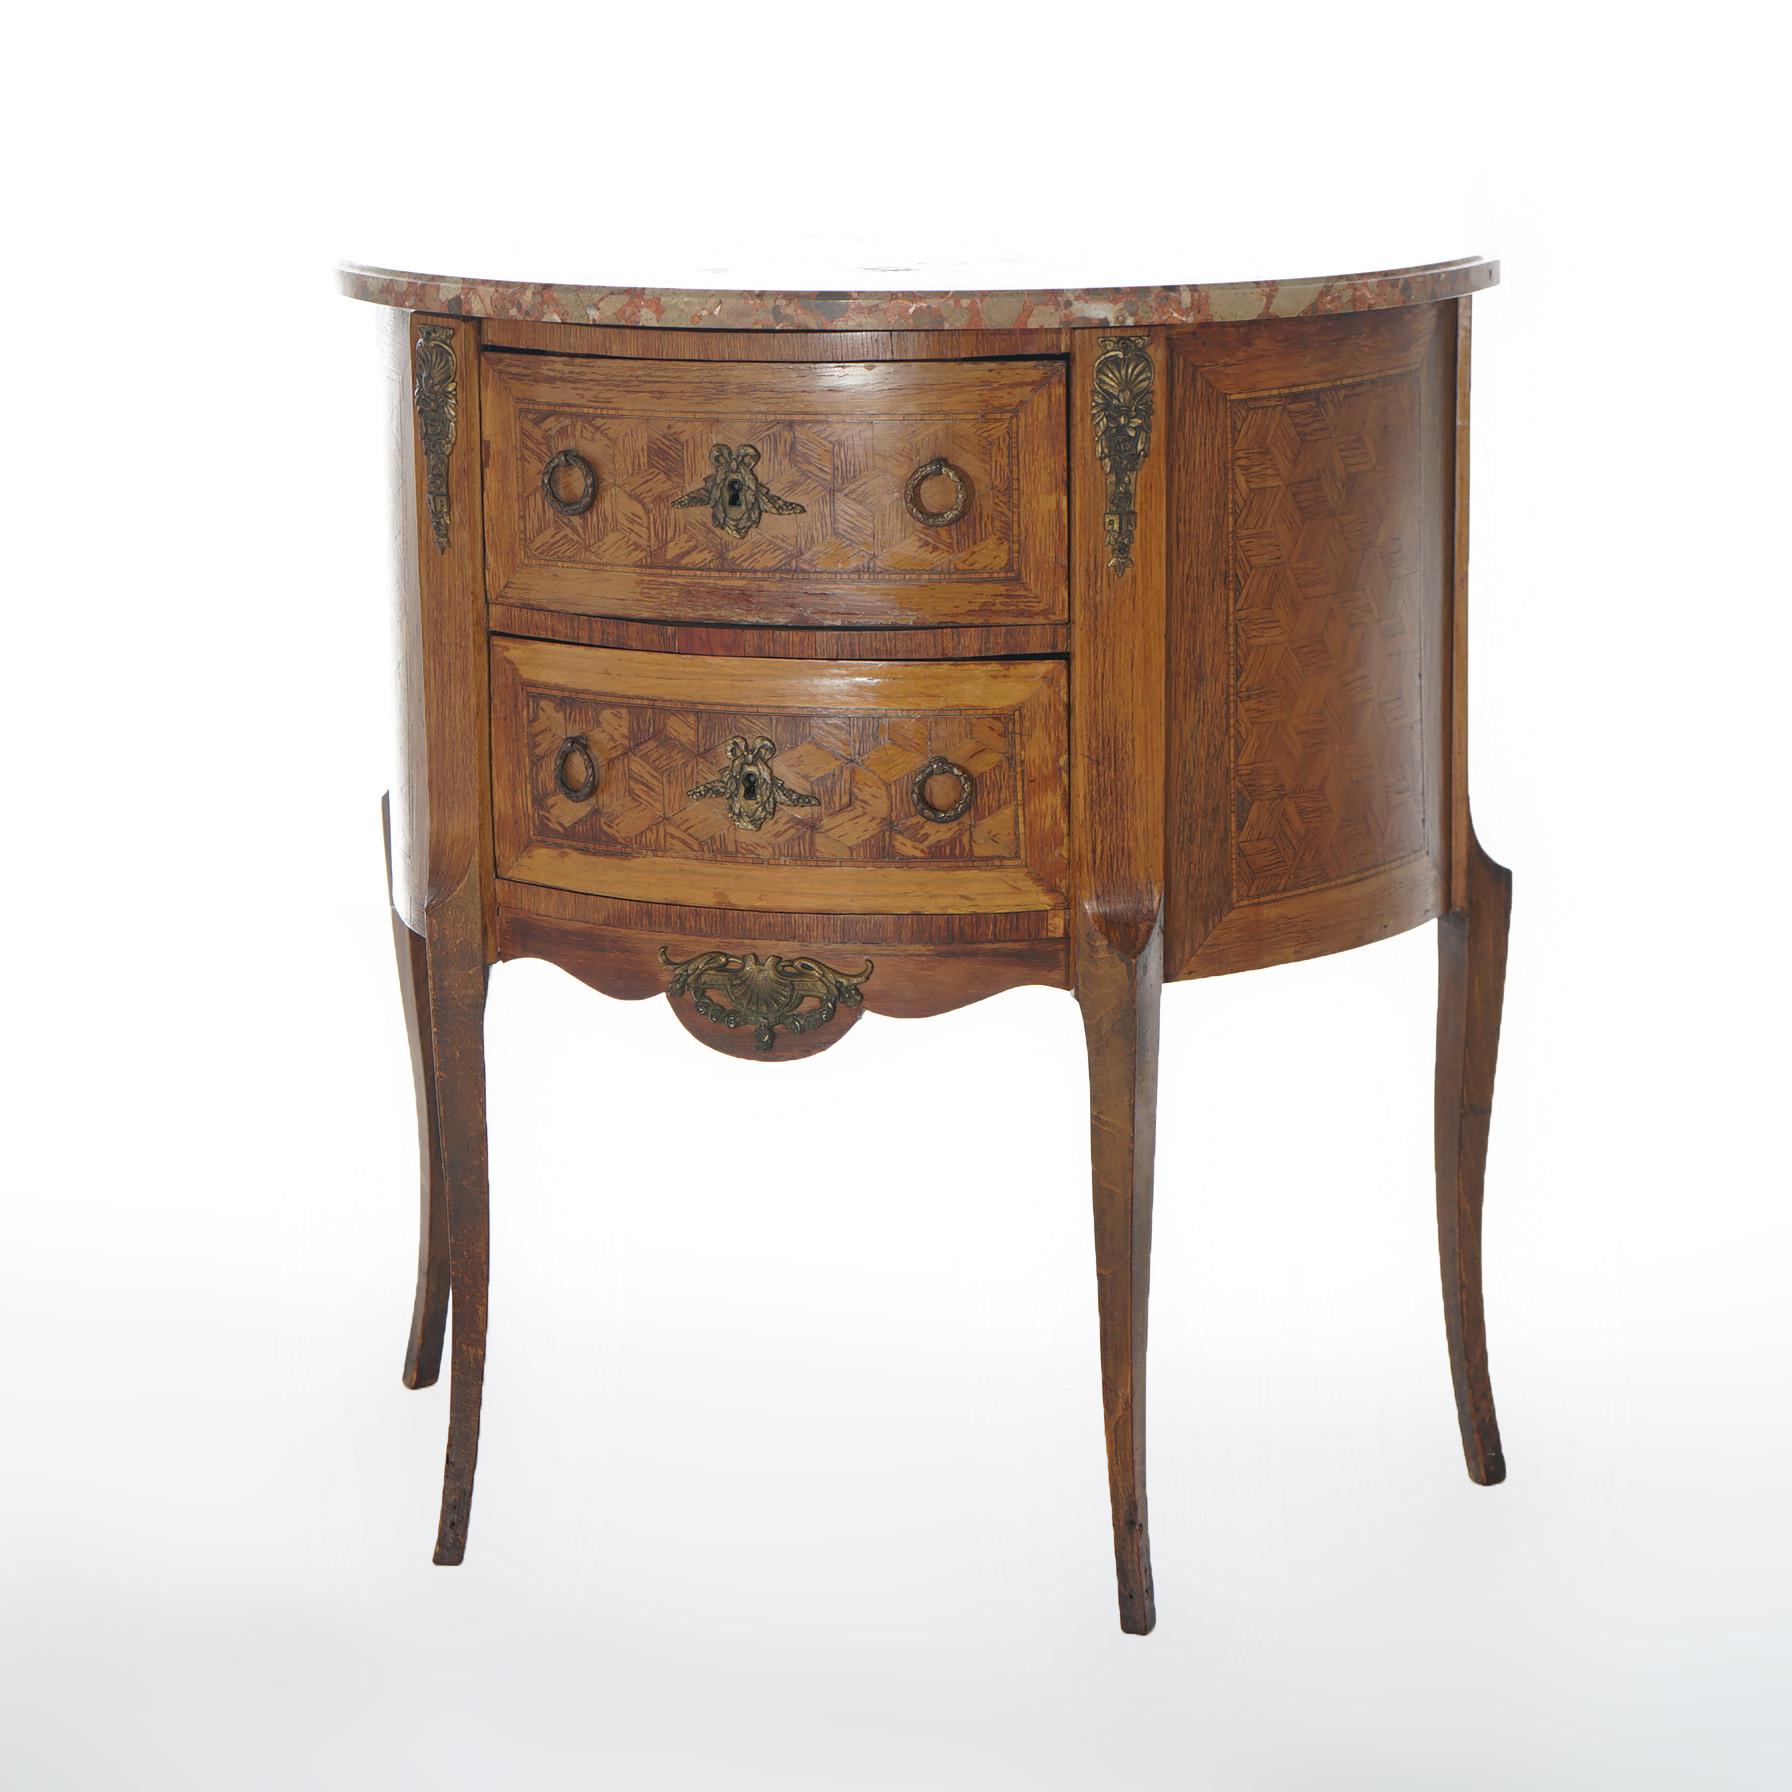 An antique French side stand offers specimen marble top over kingwood and satinwood case in demilune form with shaped skirt and having two drawers, cast bronze mounts and raised on cabriole legs, c1920

Measures - 36